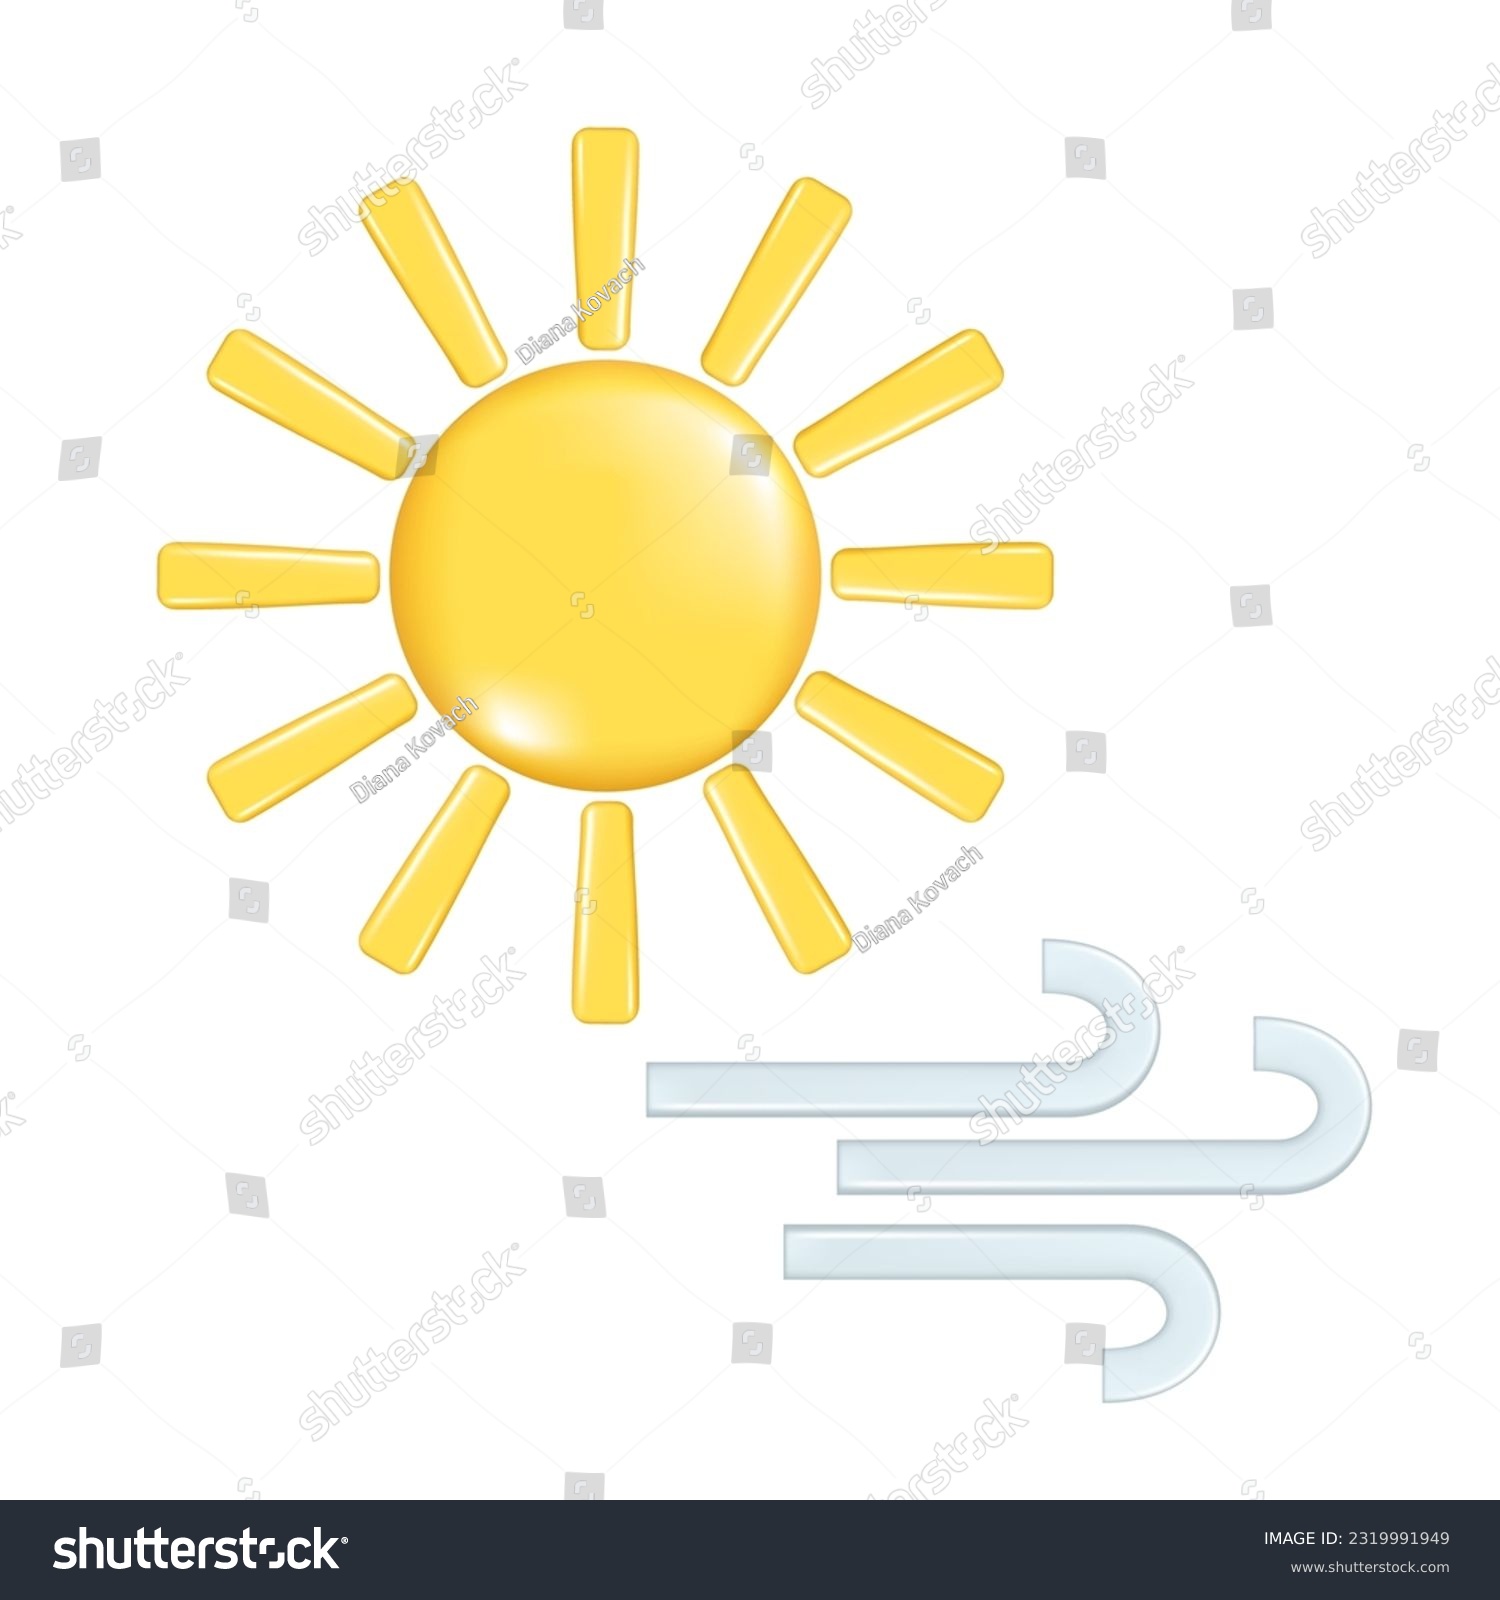 SVG of Realistic 3d design of weather forecast elements, icon symbol, meteorology. Decorative 3d golden Sun and blue wind. Vector illustration isolated on a white background svg